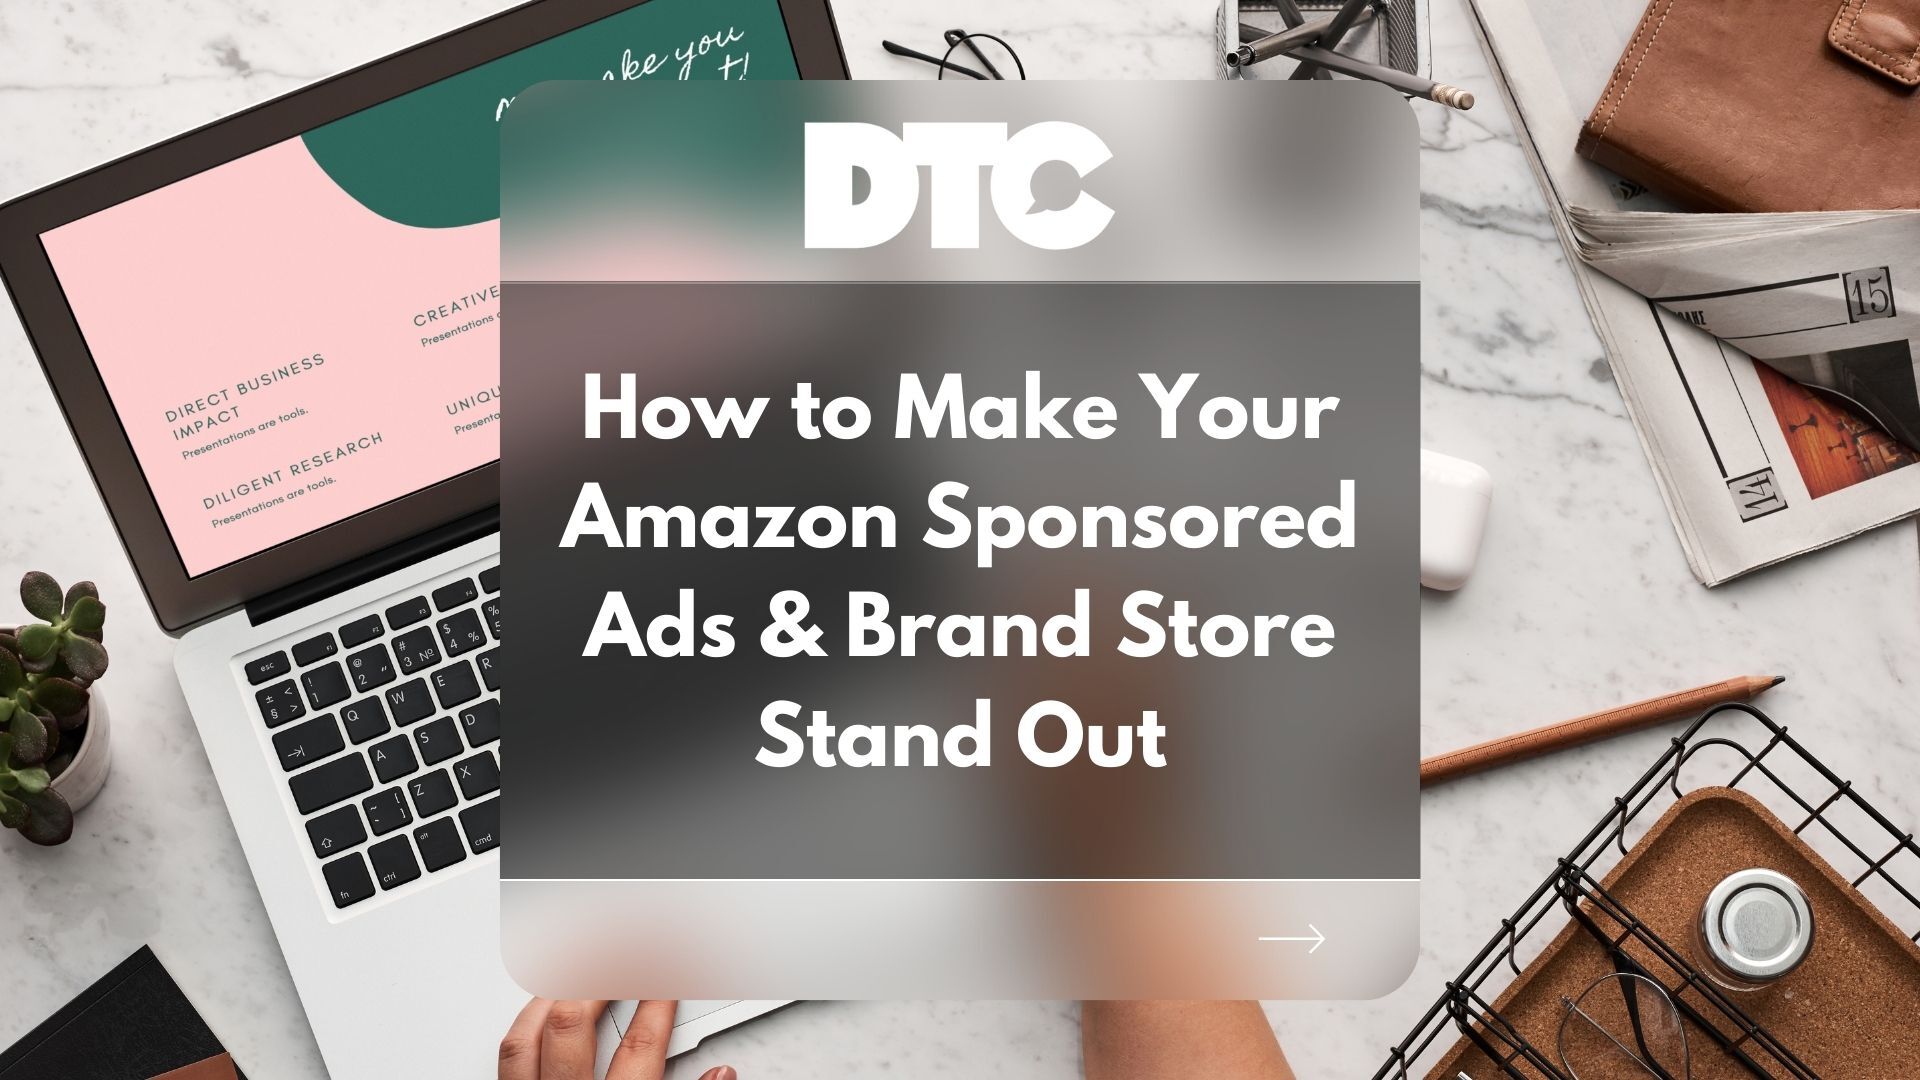 dtc amazon sponsored ads brand store featured